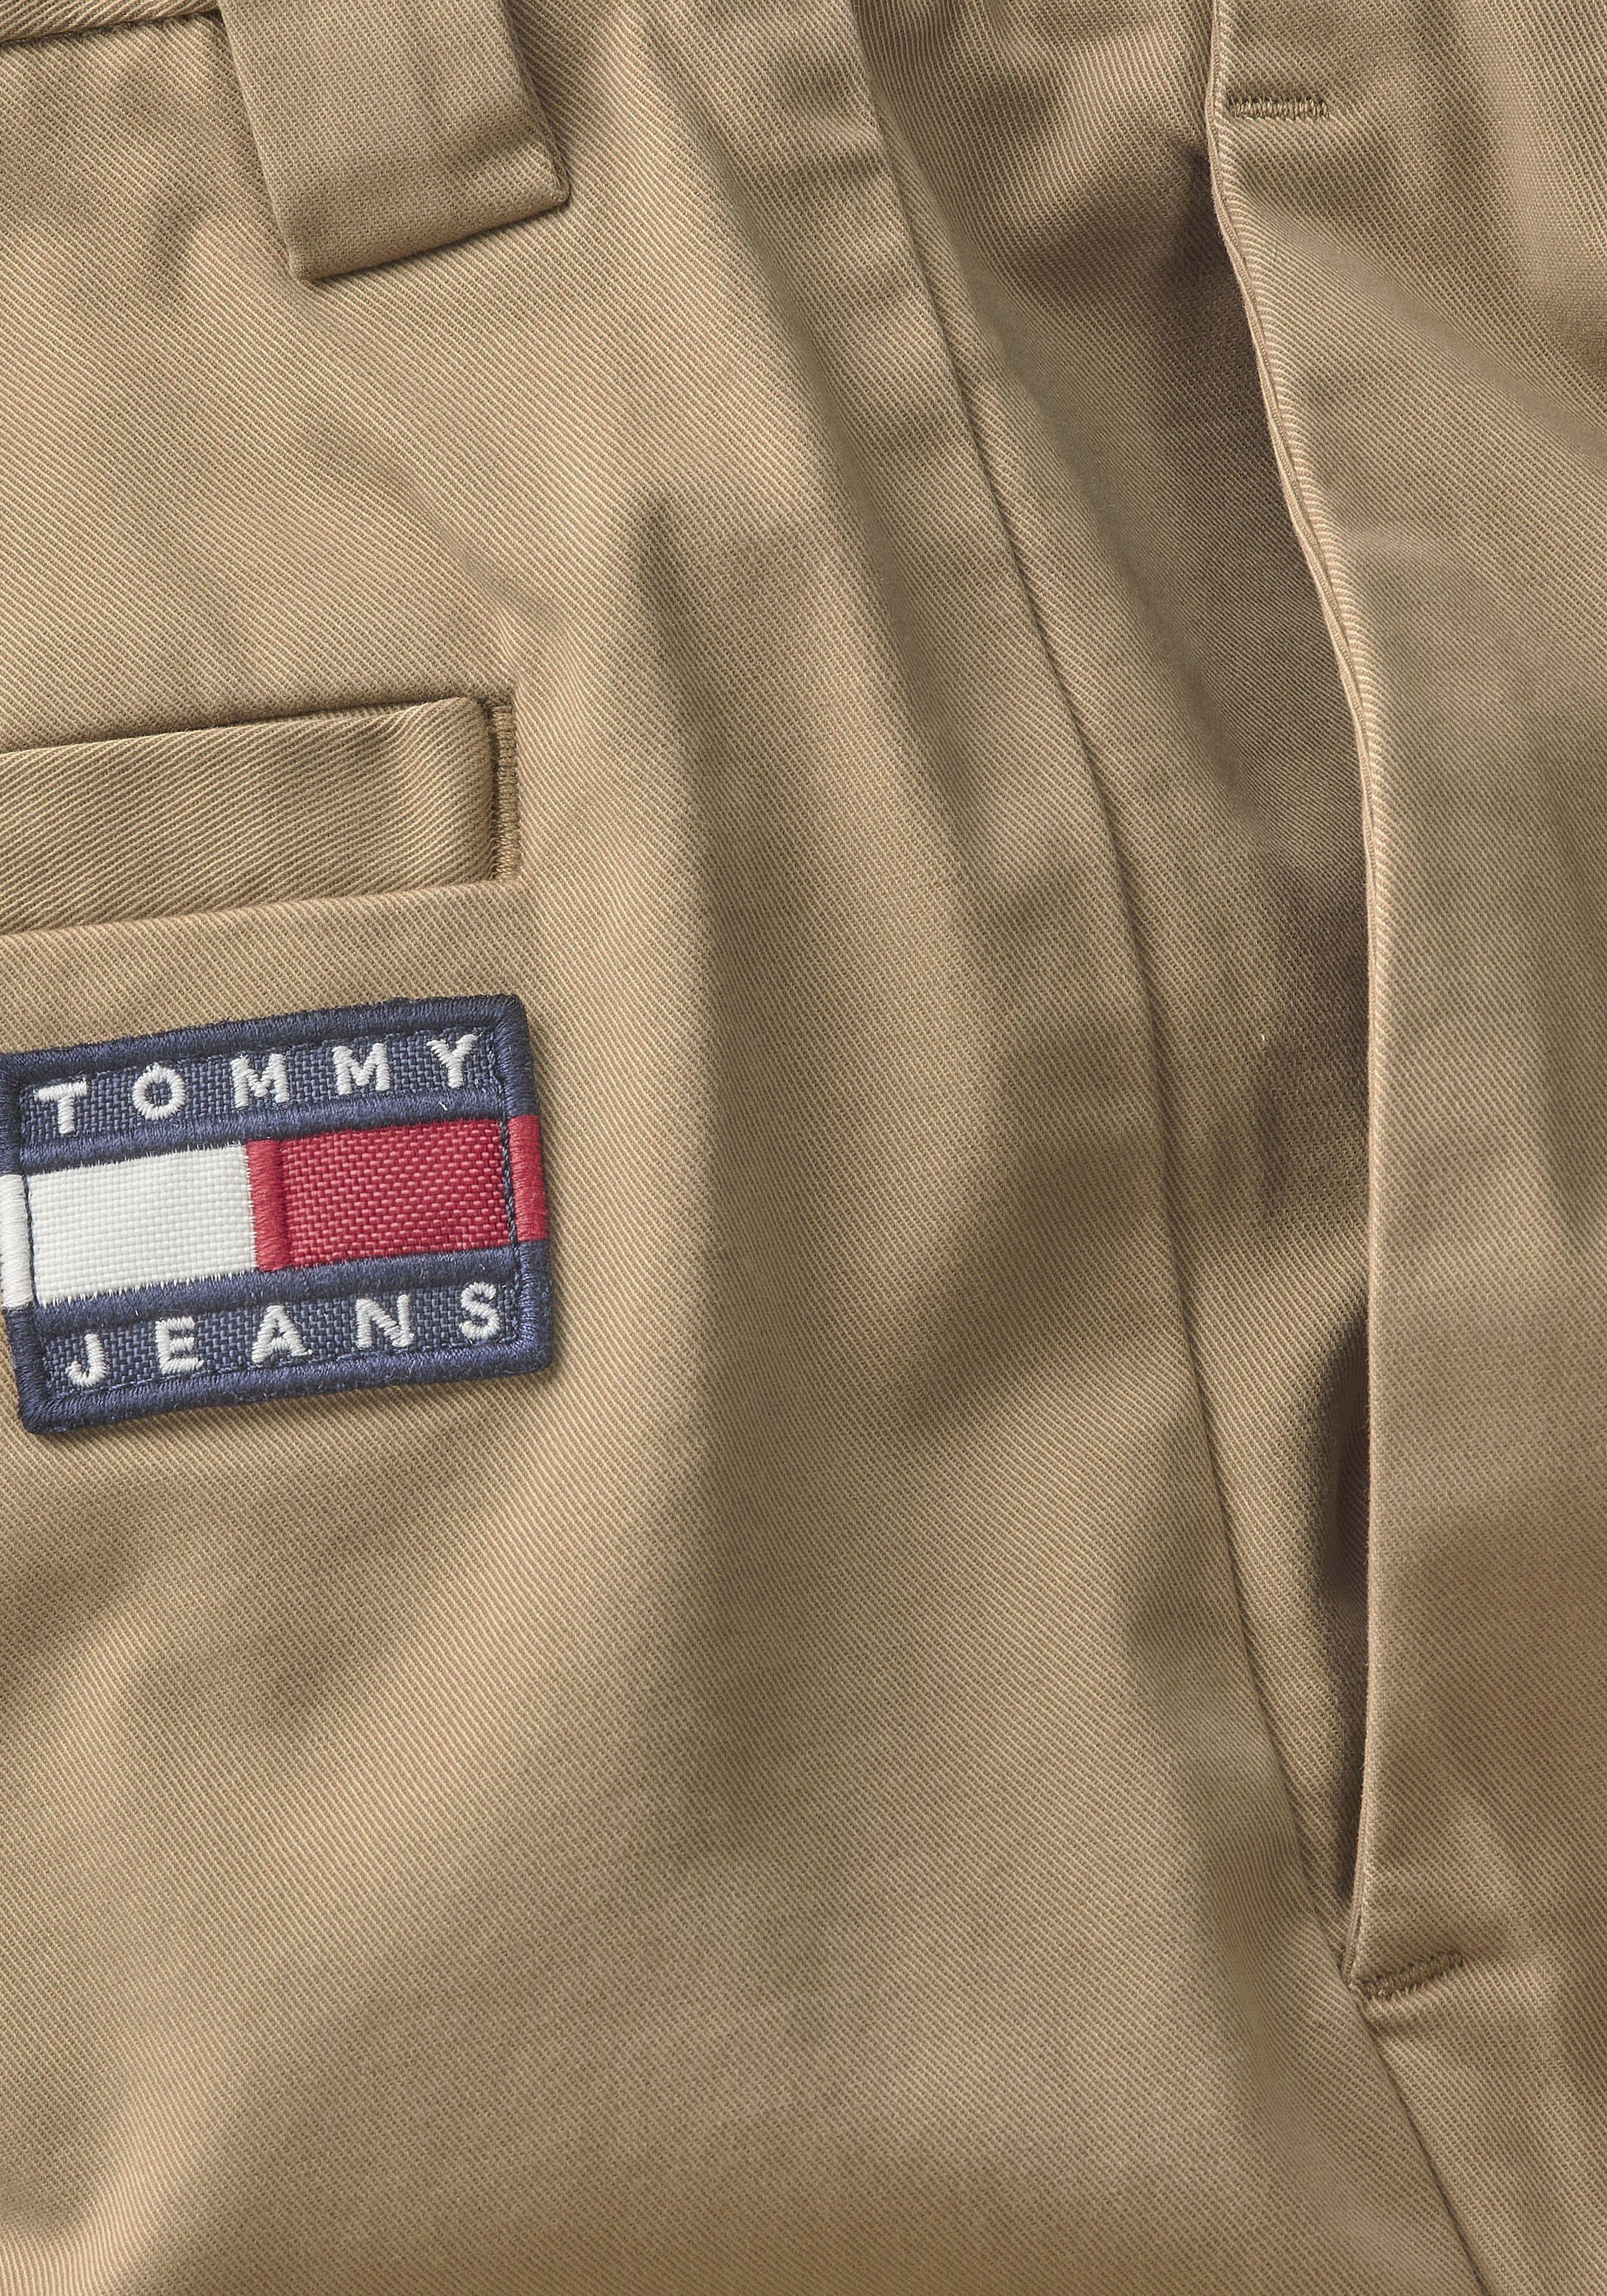 Khaki mit Tommy Classic Chinohose Jeans DAD Label-Badge CHINO TJM